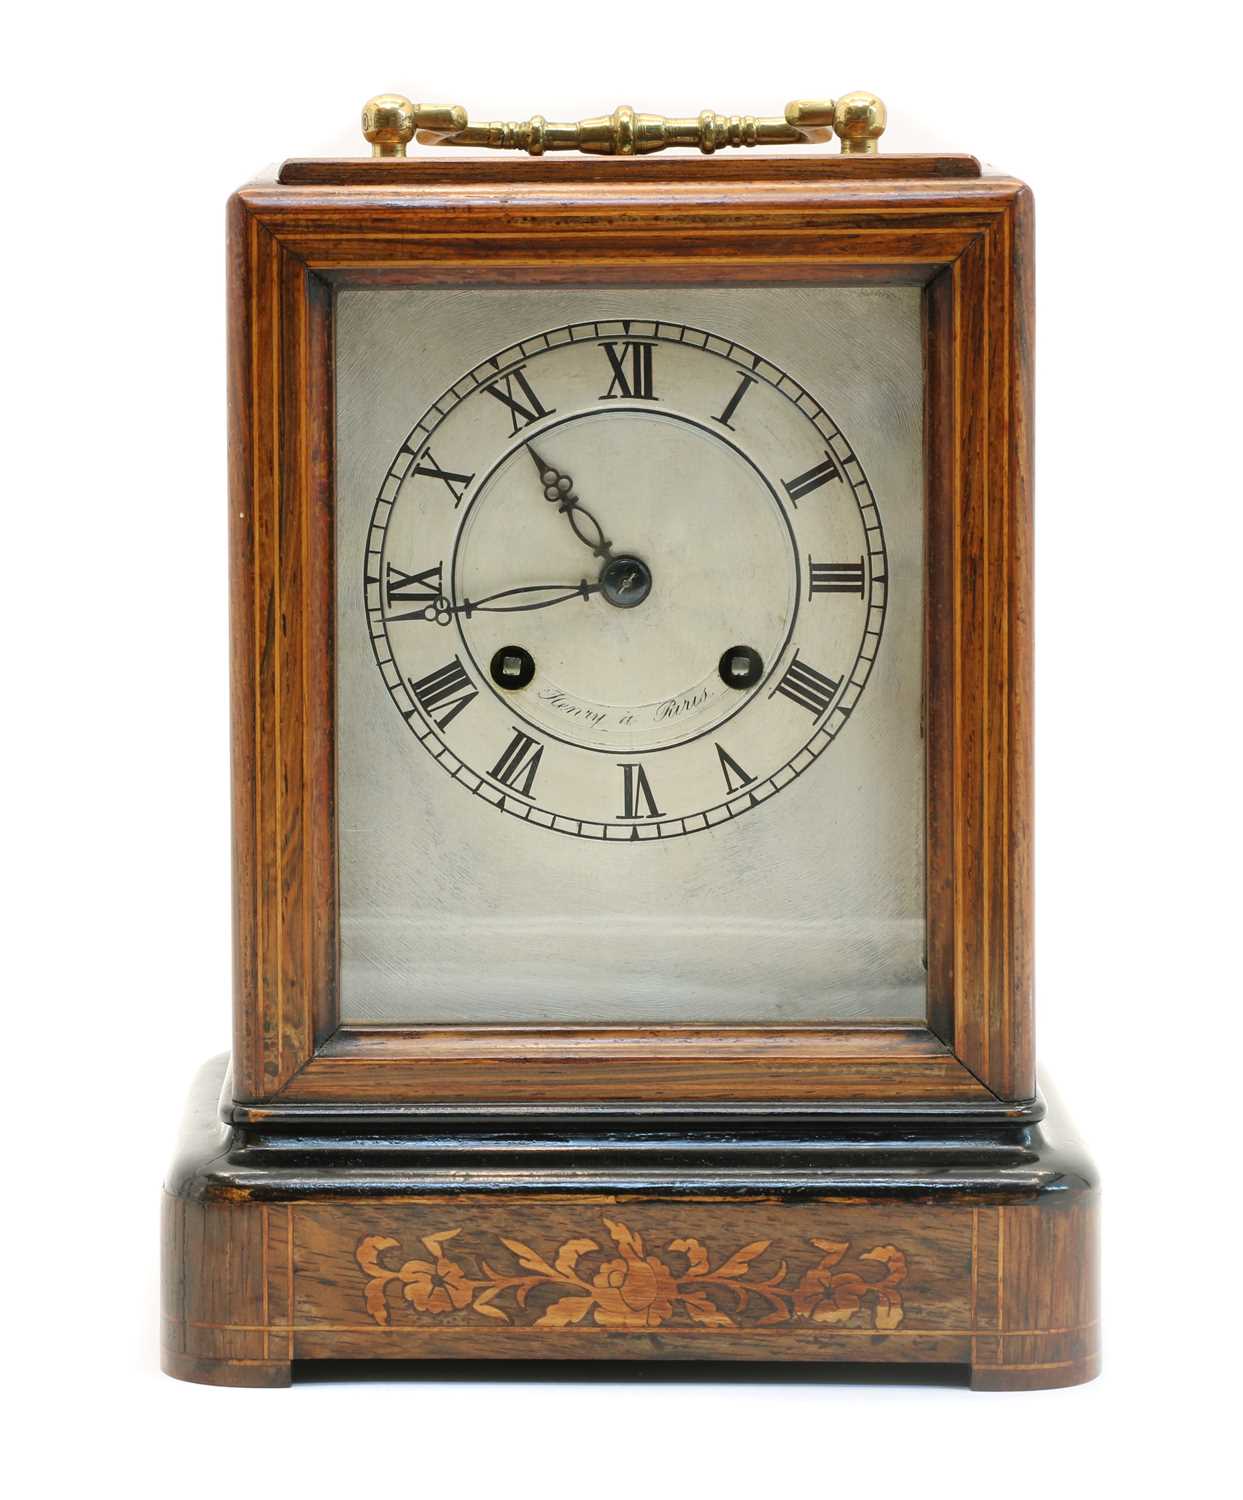 Lot 83 - A late 19th century French carriage clock